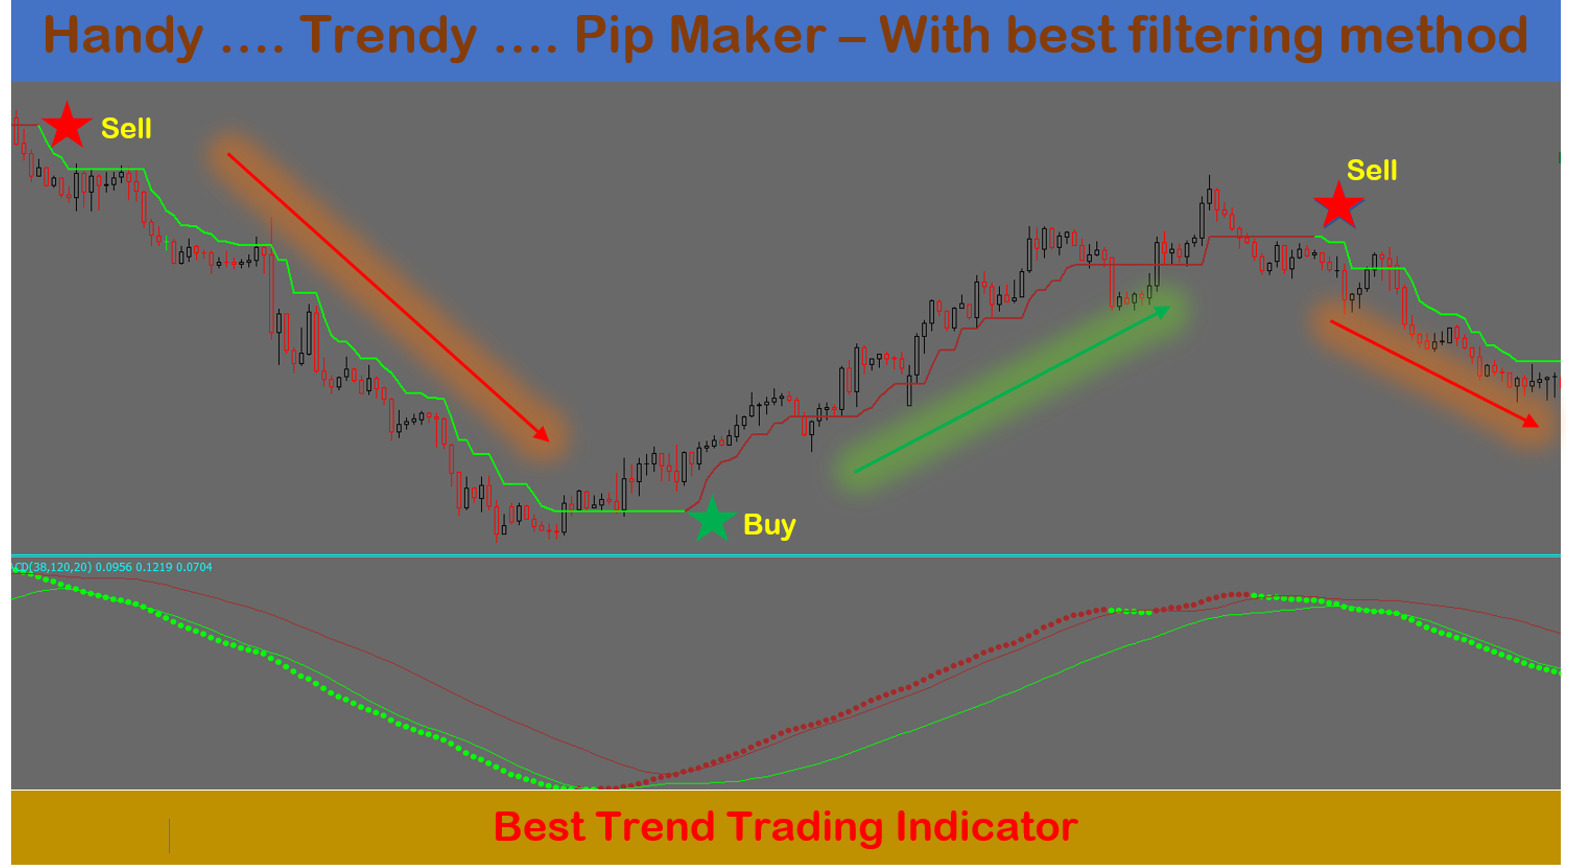 Forex Trendy trading signal indicator no repaint high profitable system PRO FX